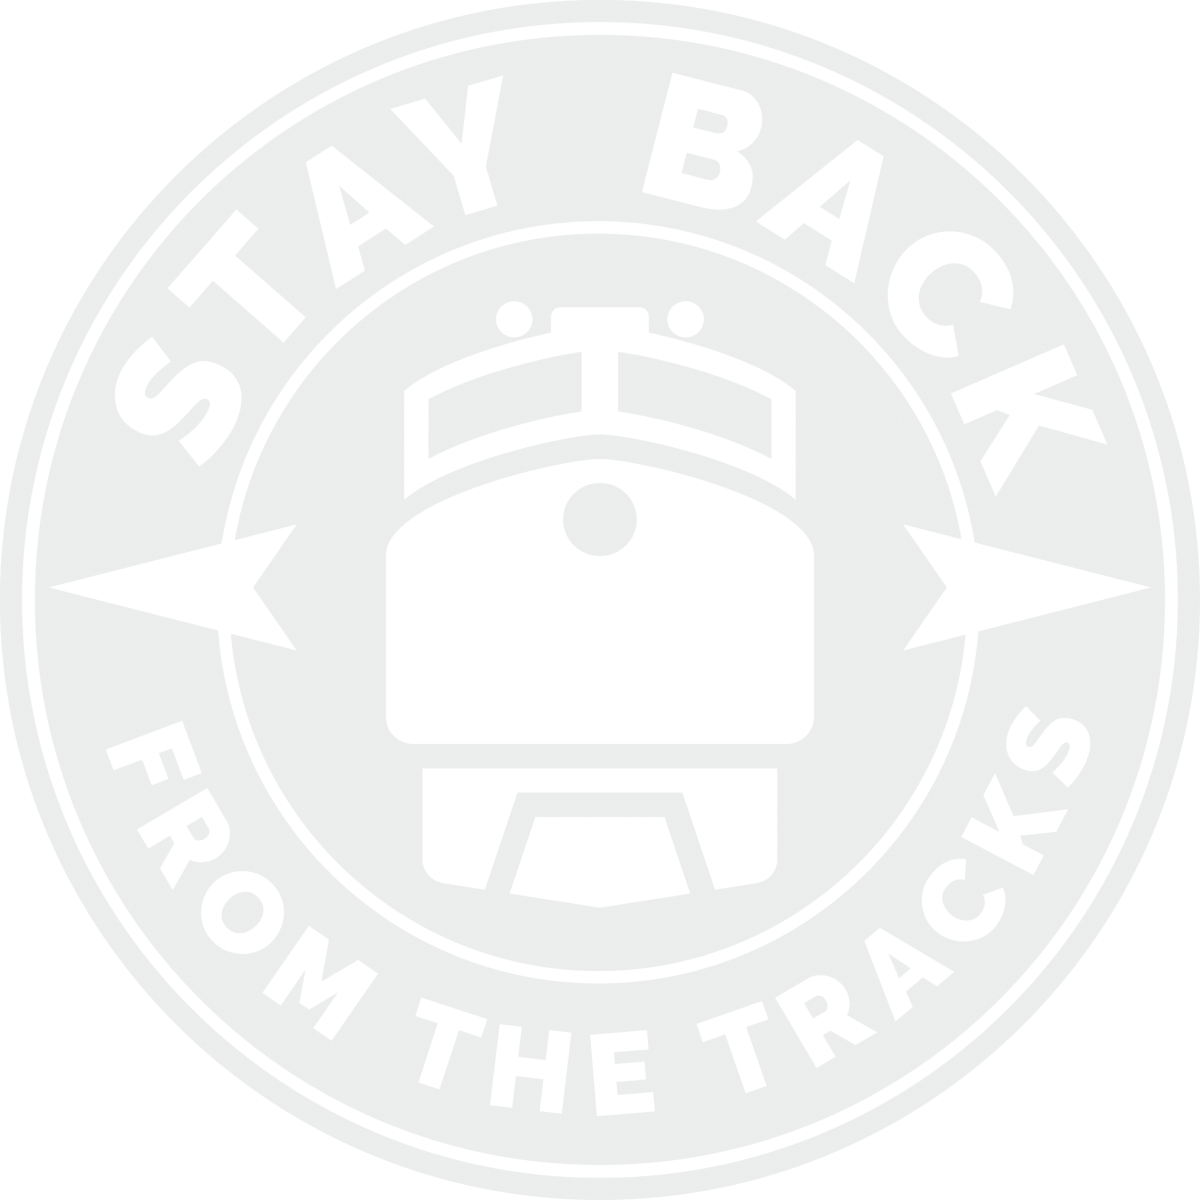 stay-back-stamp